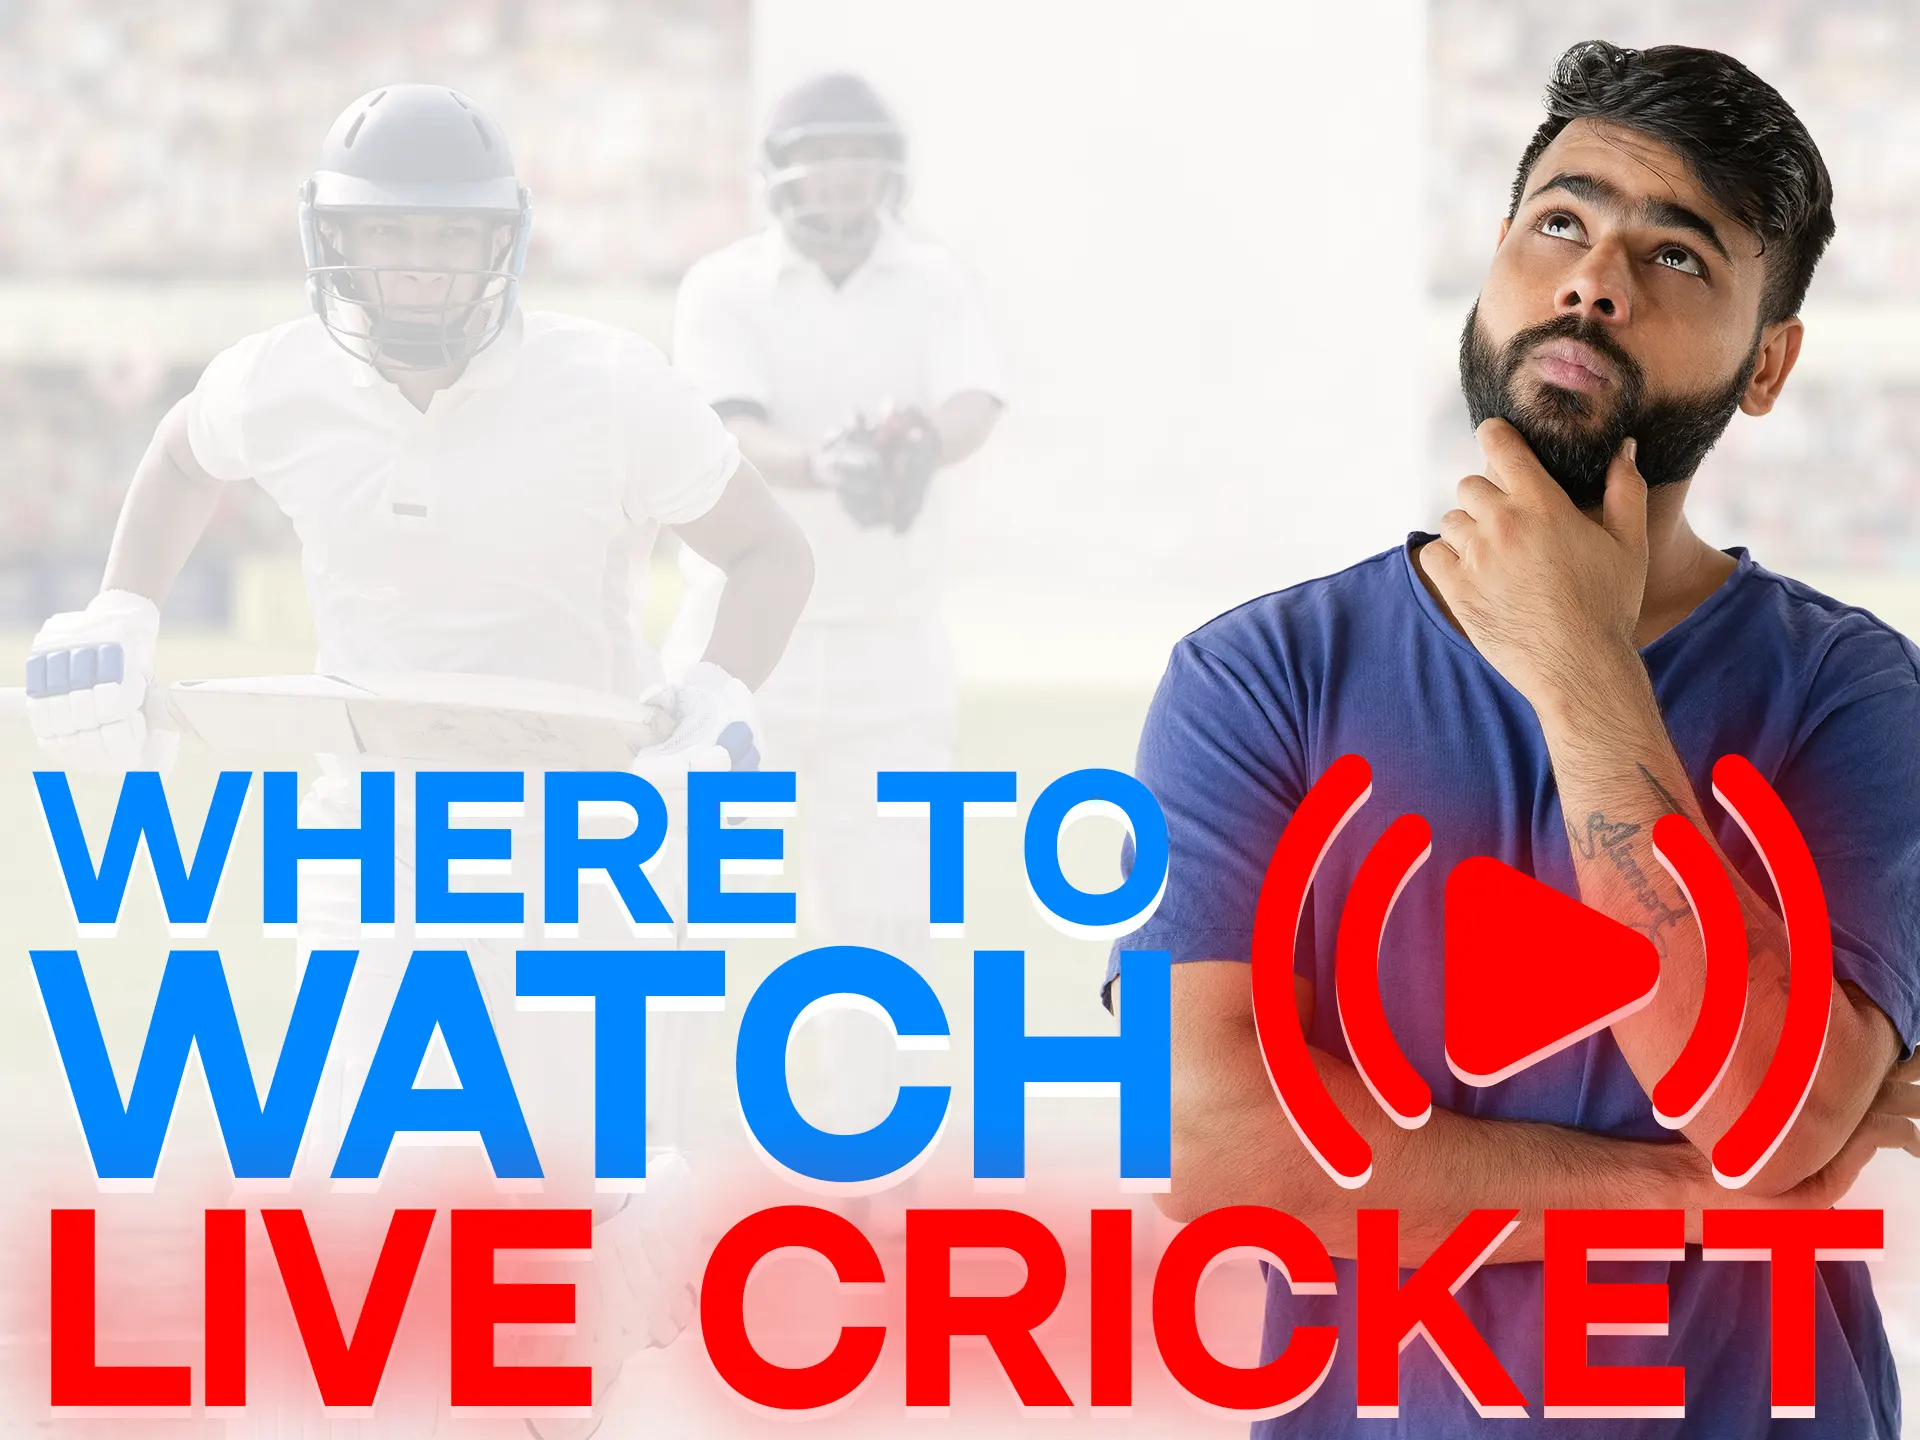 Check out the most popular platforms where you can see cricket streaming.